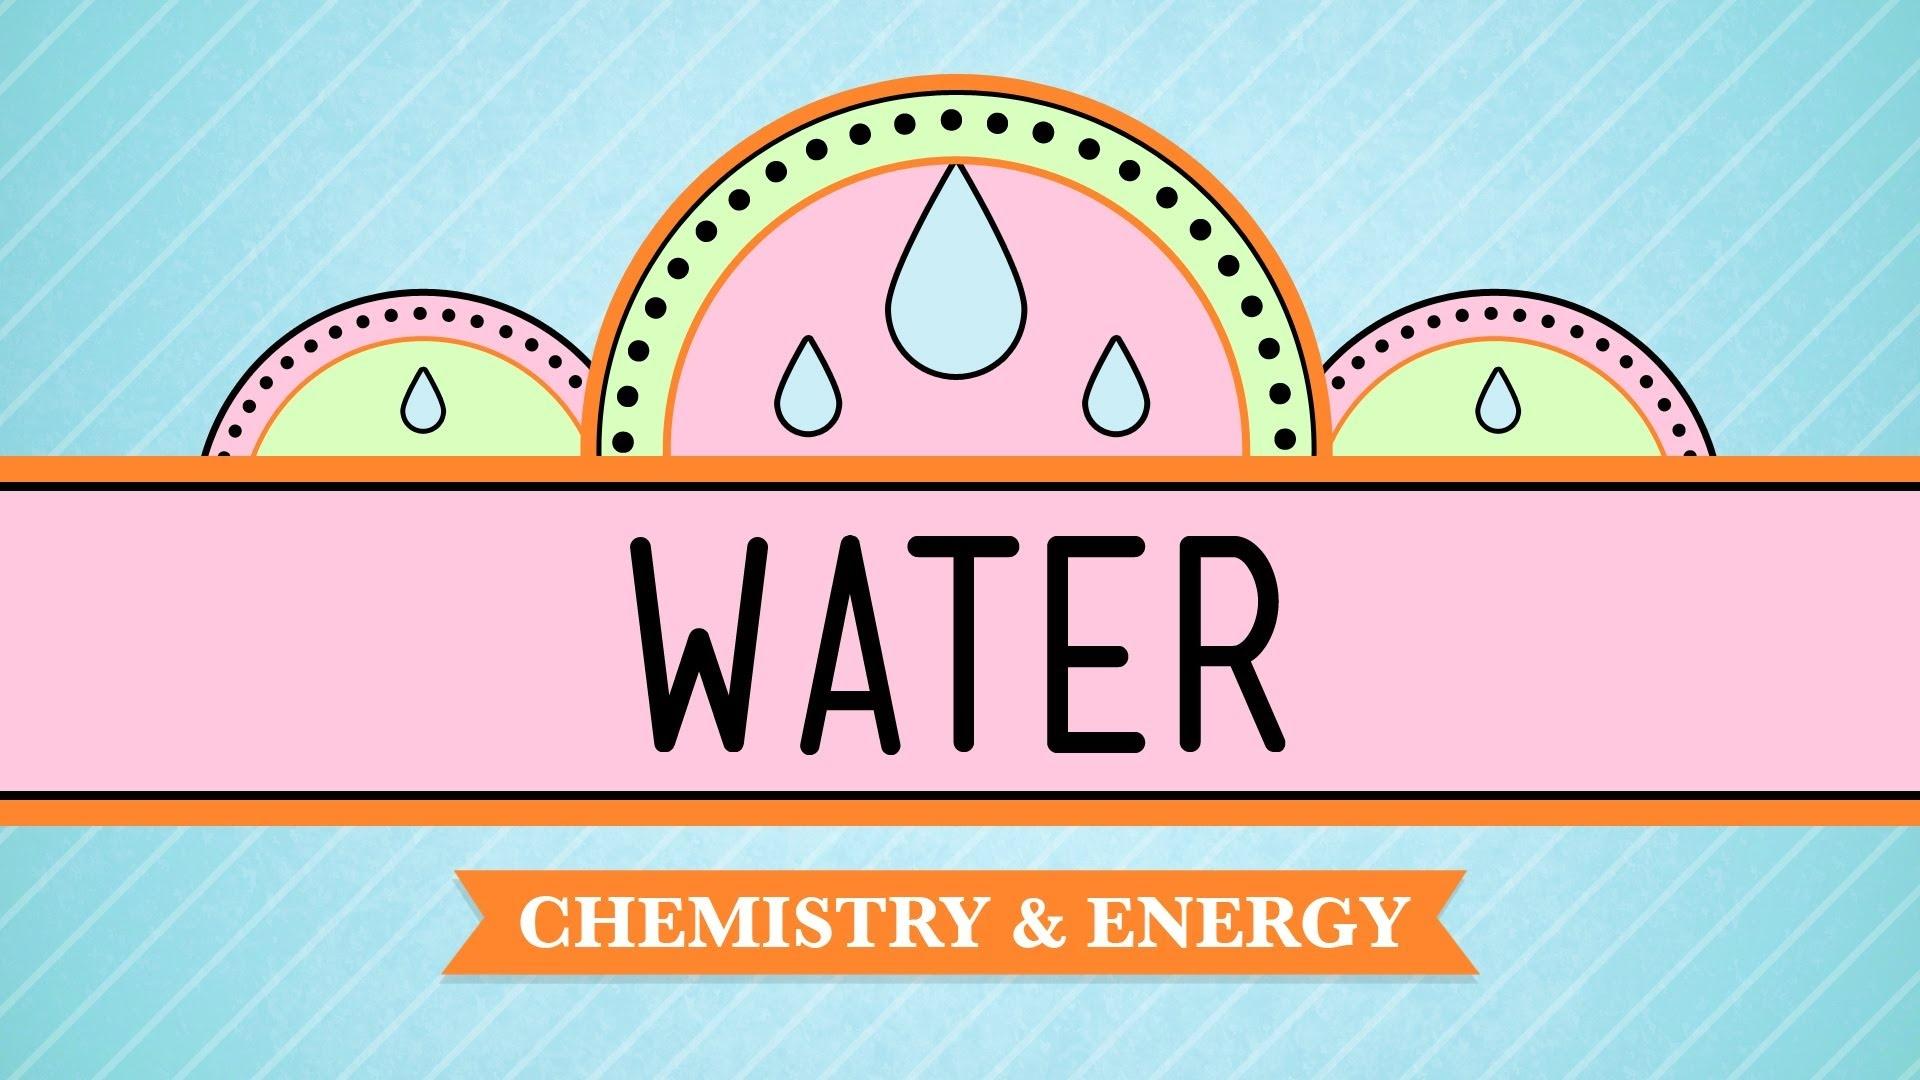 Water Liquid Awesome Worksheet Answers